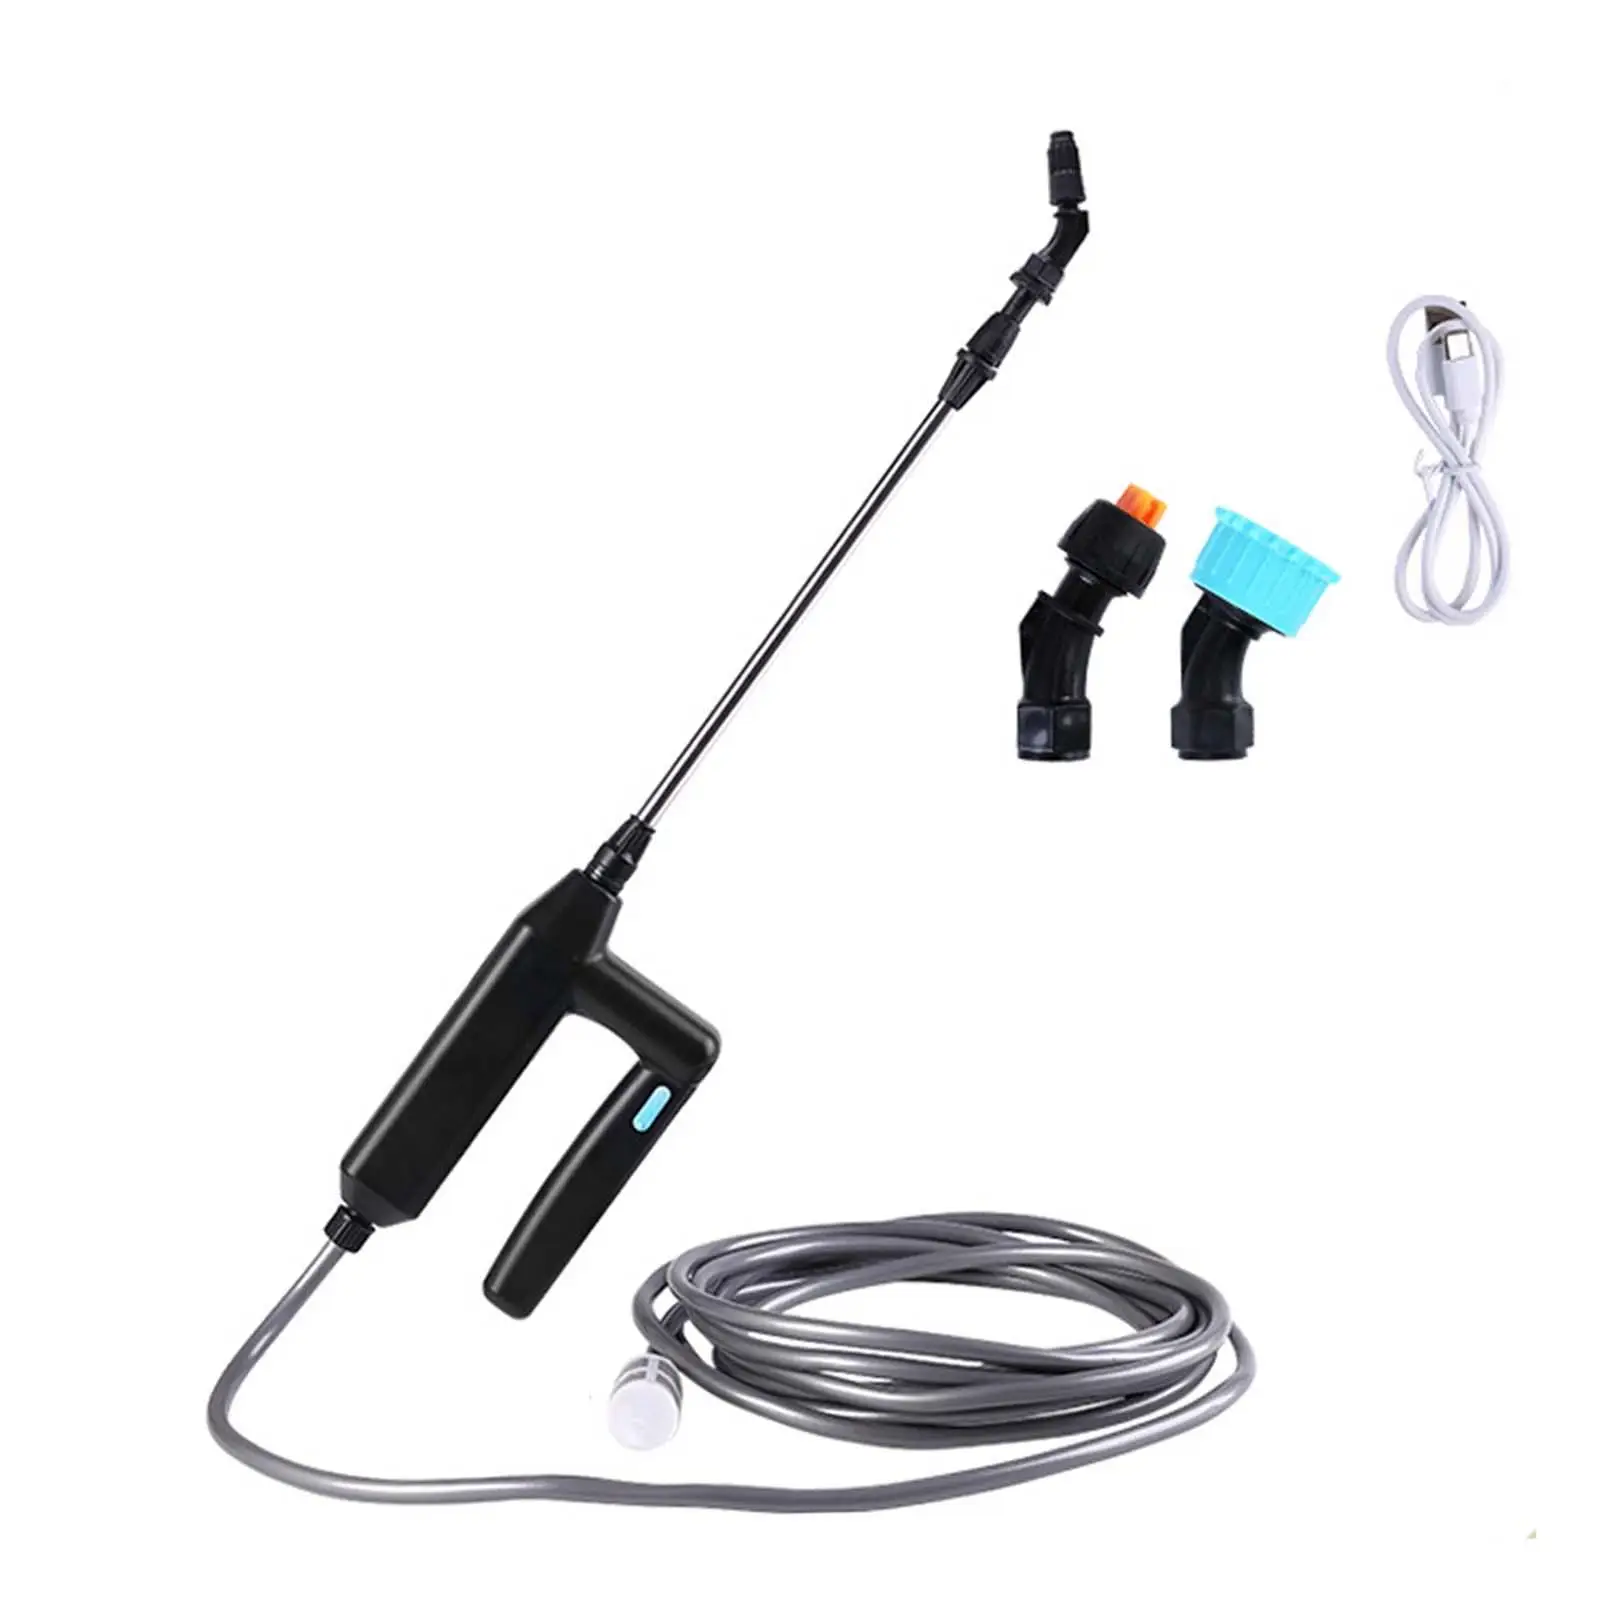 Garden Sprayer Handheld with Hose Nozzle Portable Flower Watering Nozzle for Household Spraying Gardening Watering Home Cleaning